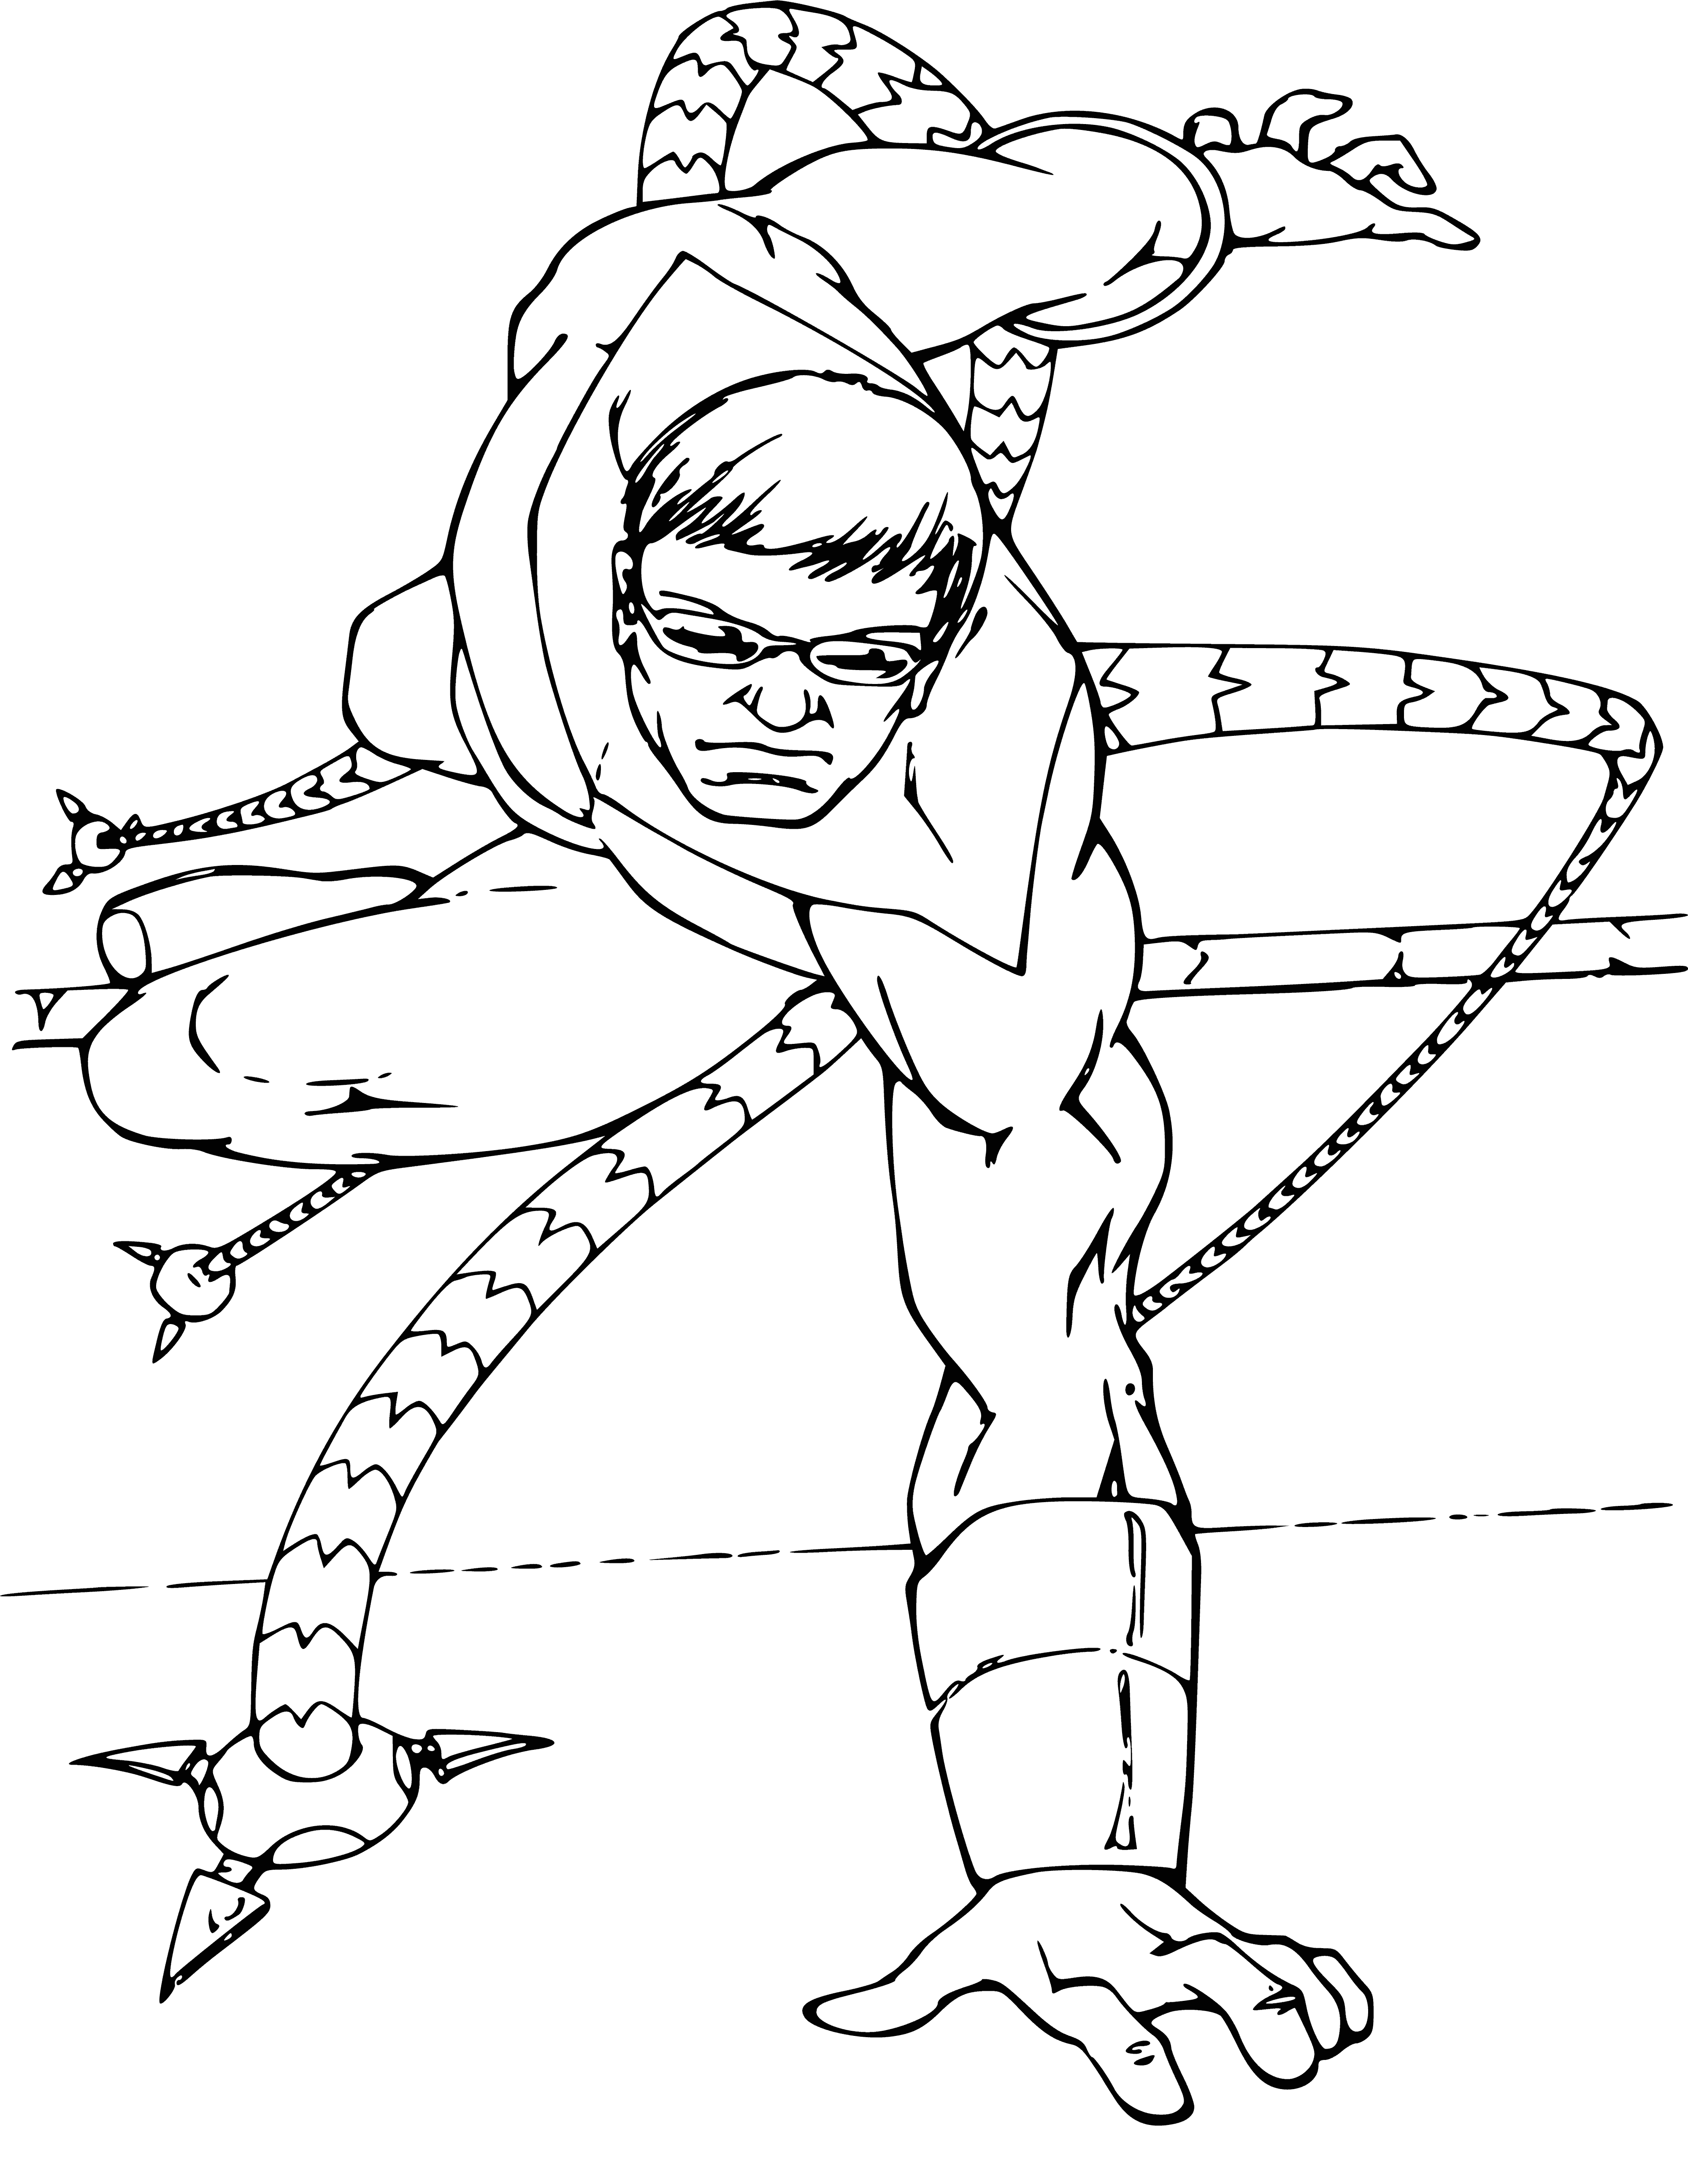 Dr Octopus coloriage